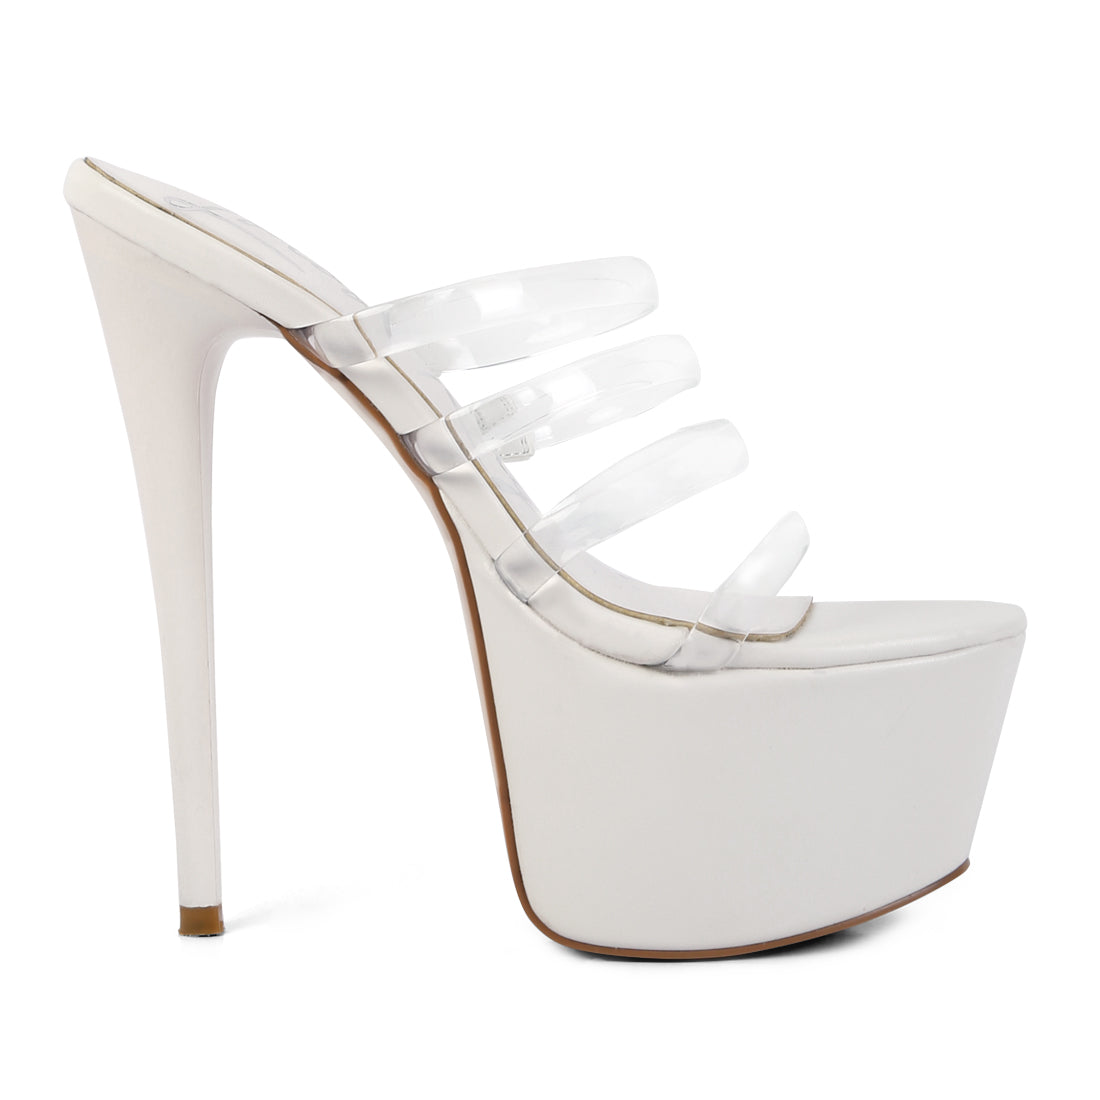 White Ultra High Heel Clear Straps Sandals